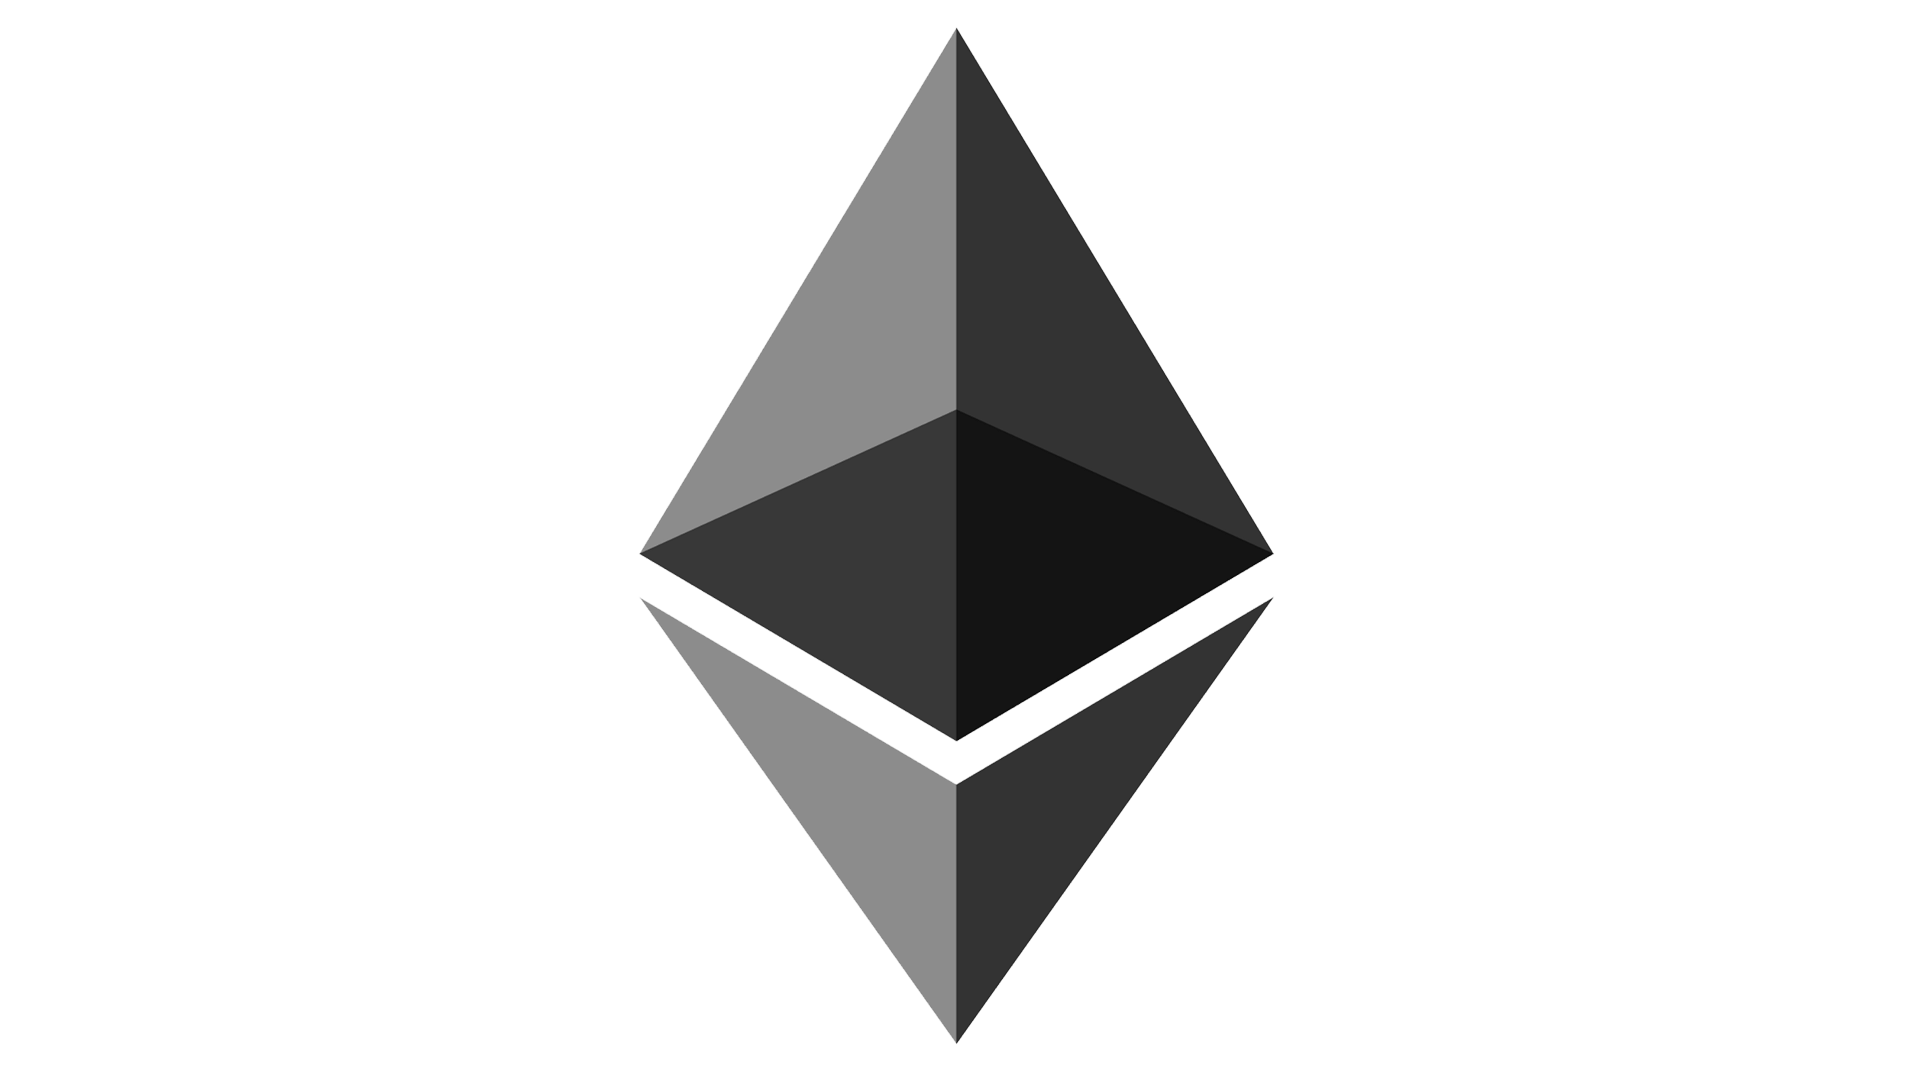 Ethereum Logo - Ethereum Logo, Ethereum Symbol, Meaning, History and Evolution